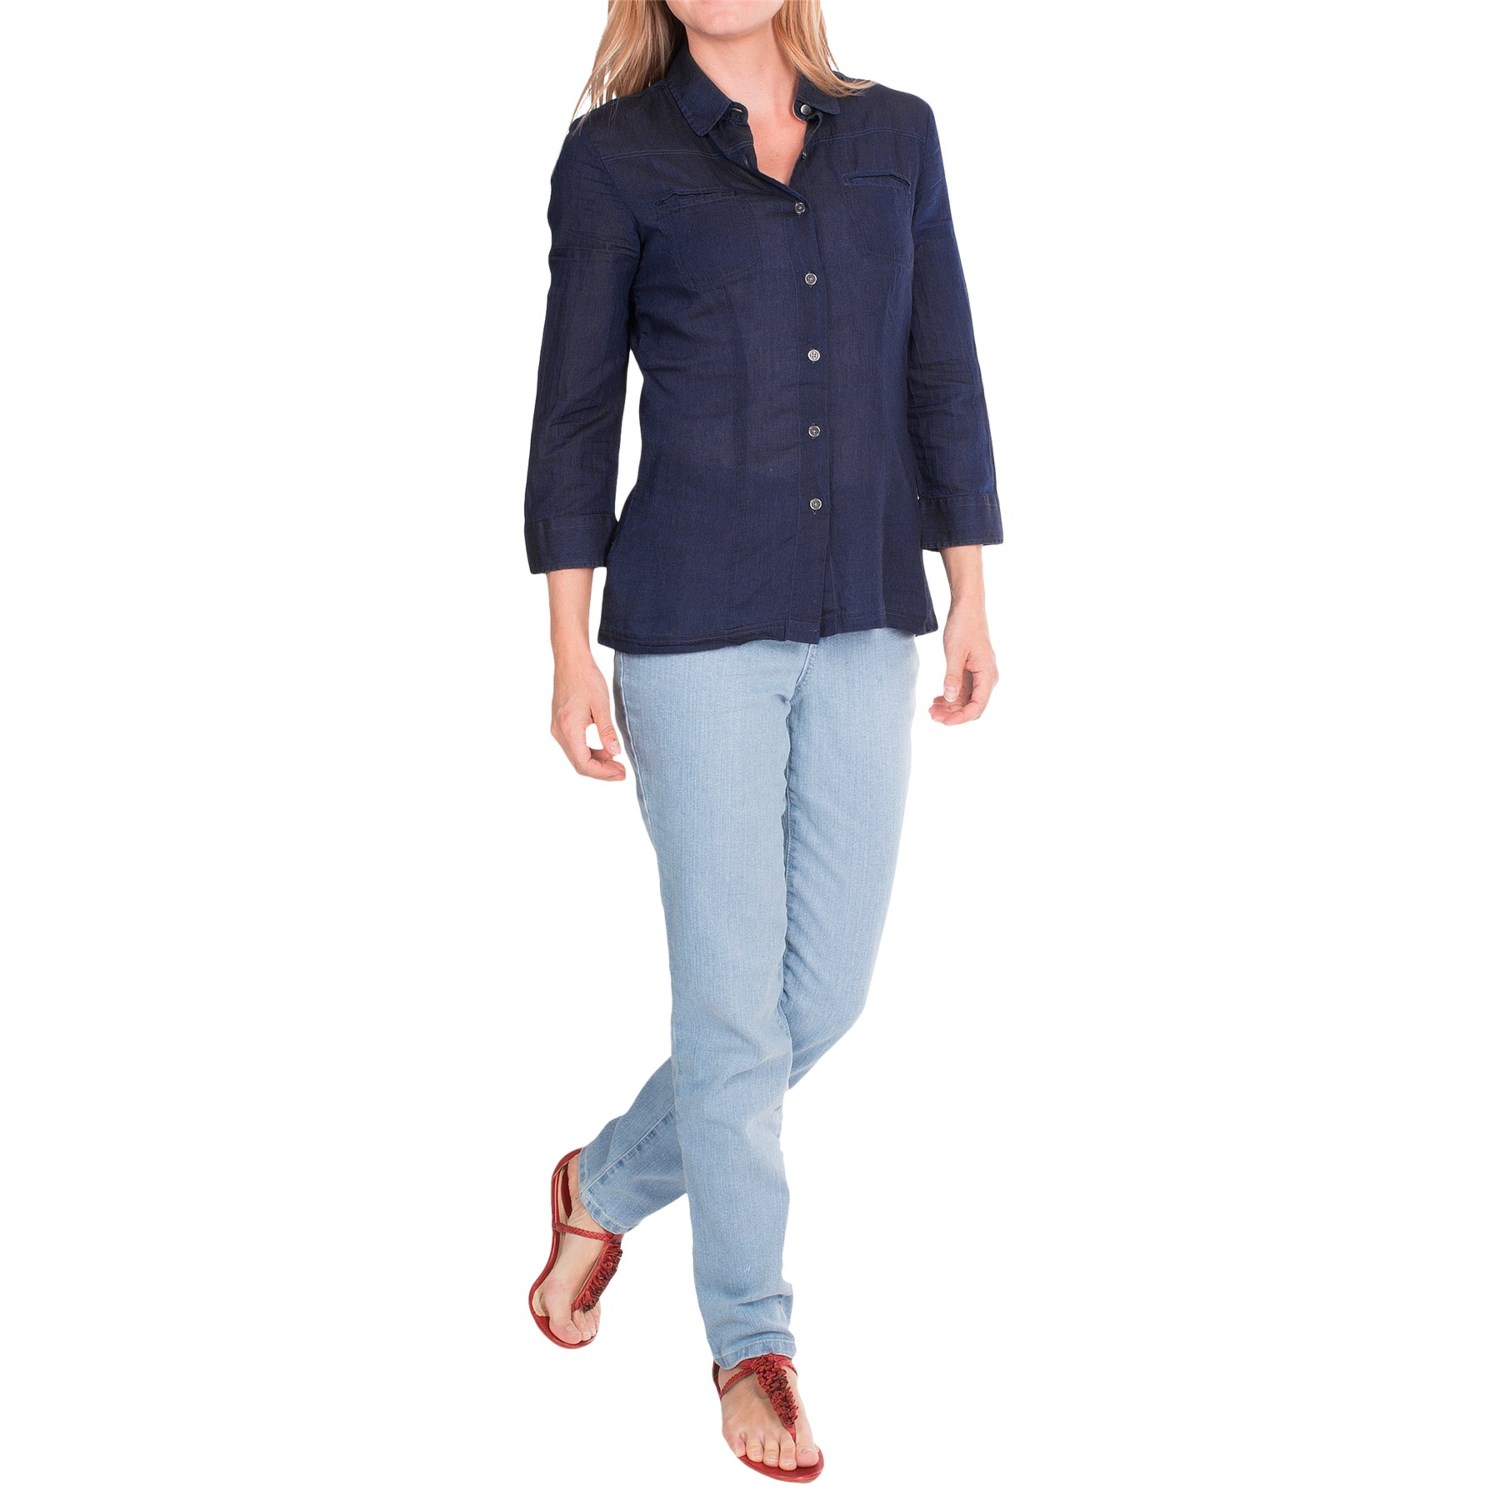 Barbour Cotton Chambray Shirt - Long Sleeve (For Women)